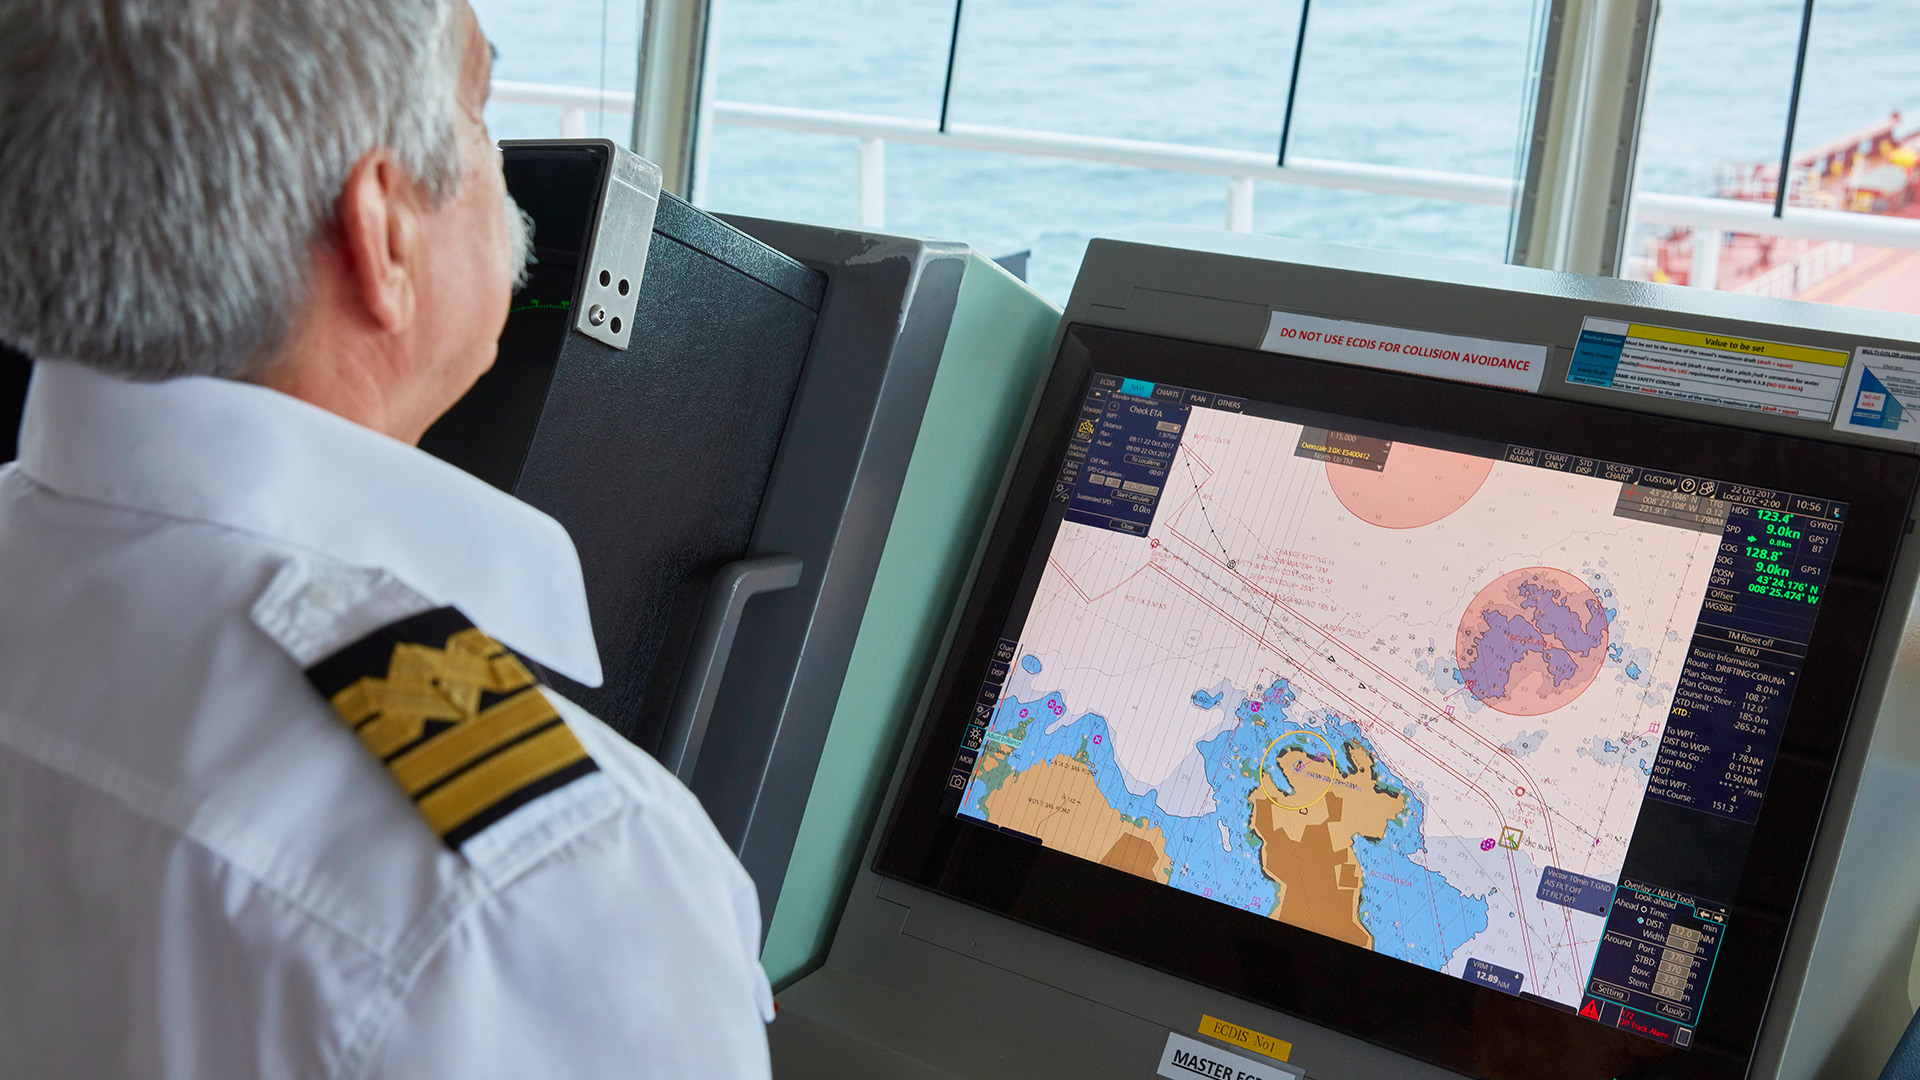 Captain steering ship with view of seabed map